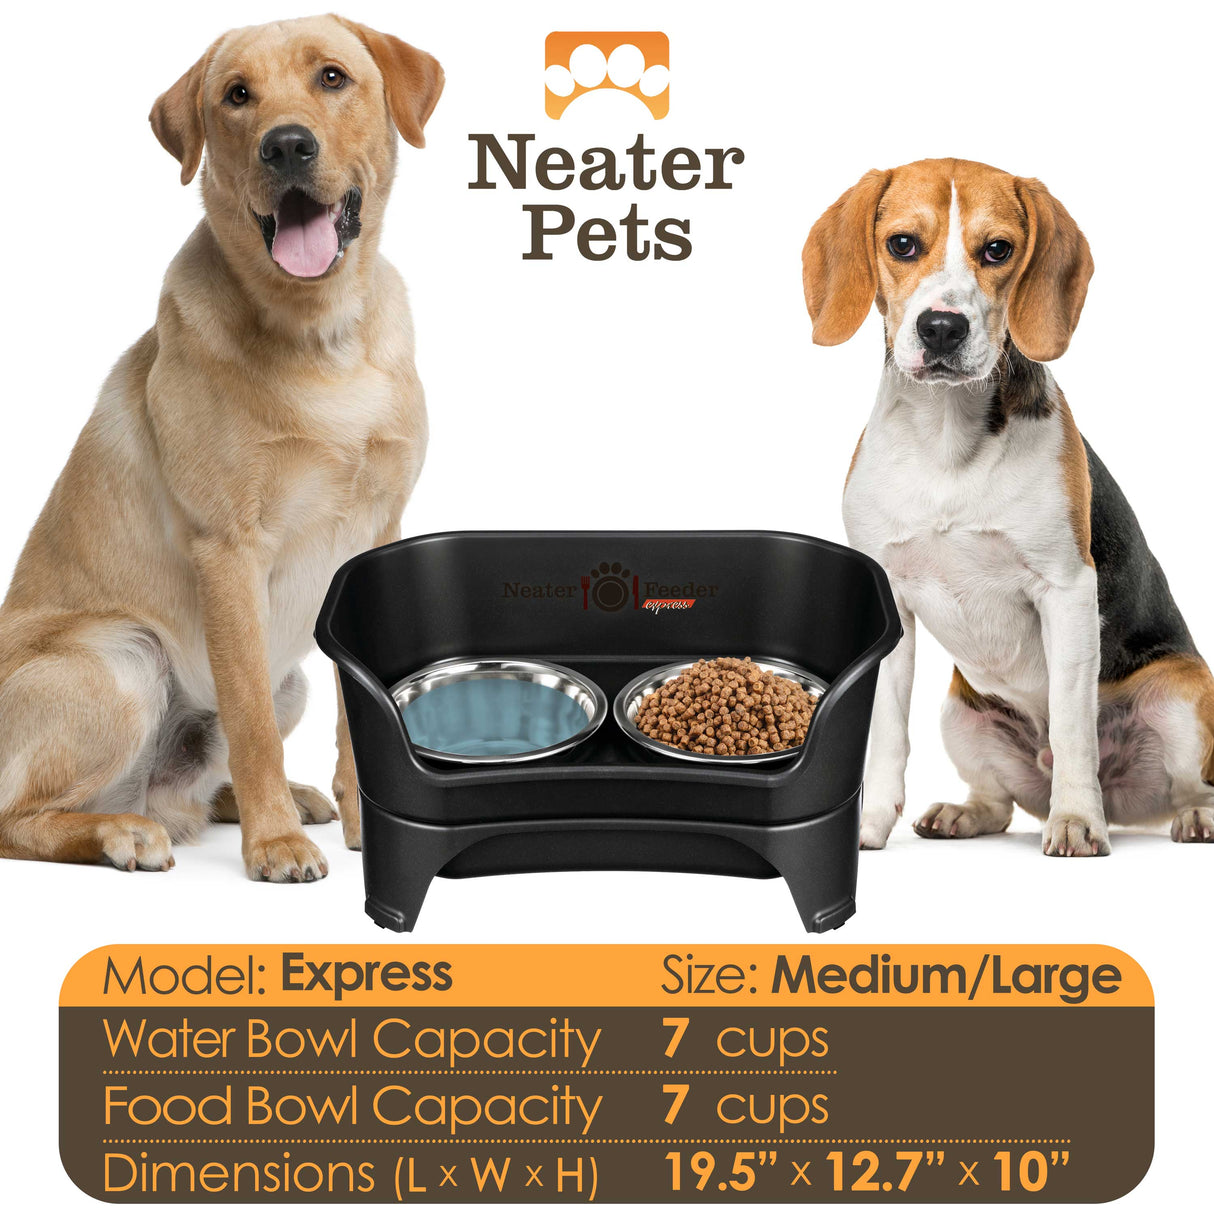 Midnight Black Express Medium to Large Dog feeder bowl capacity and dimensions